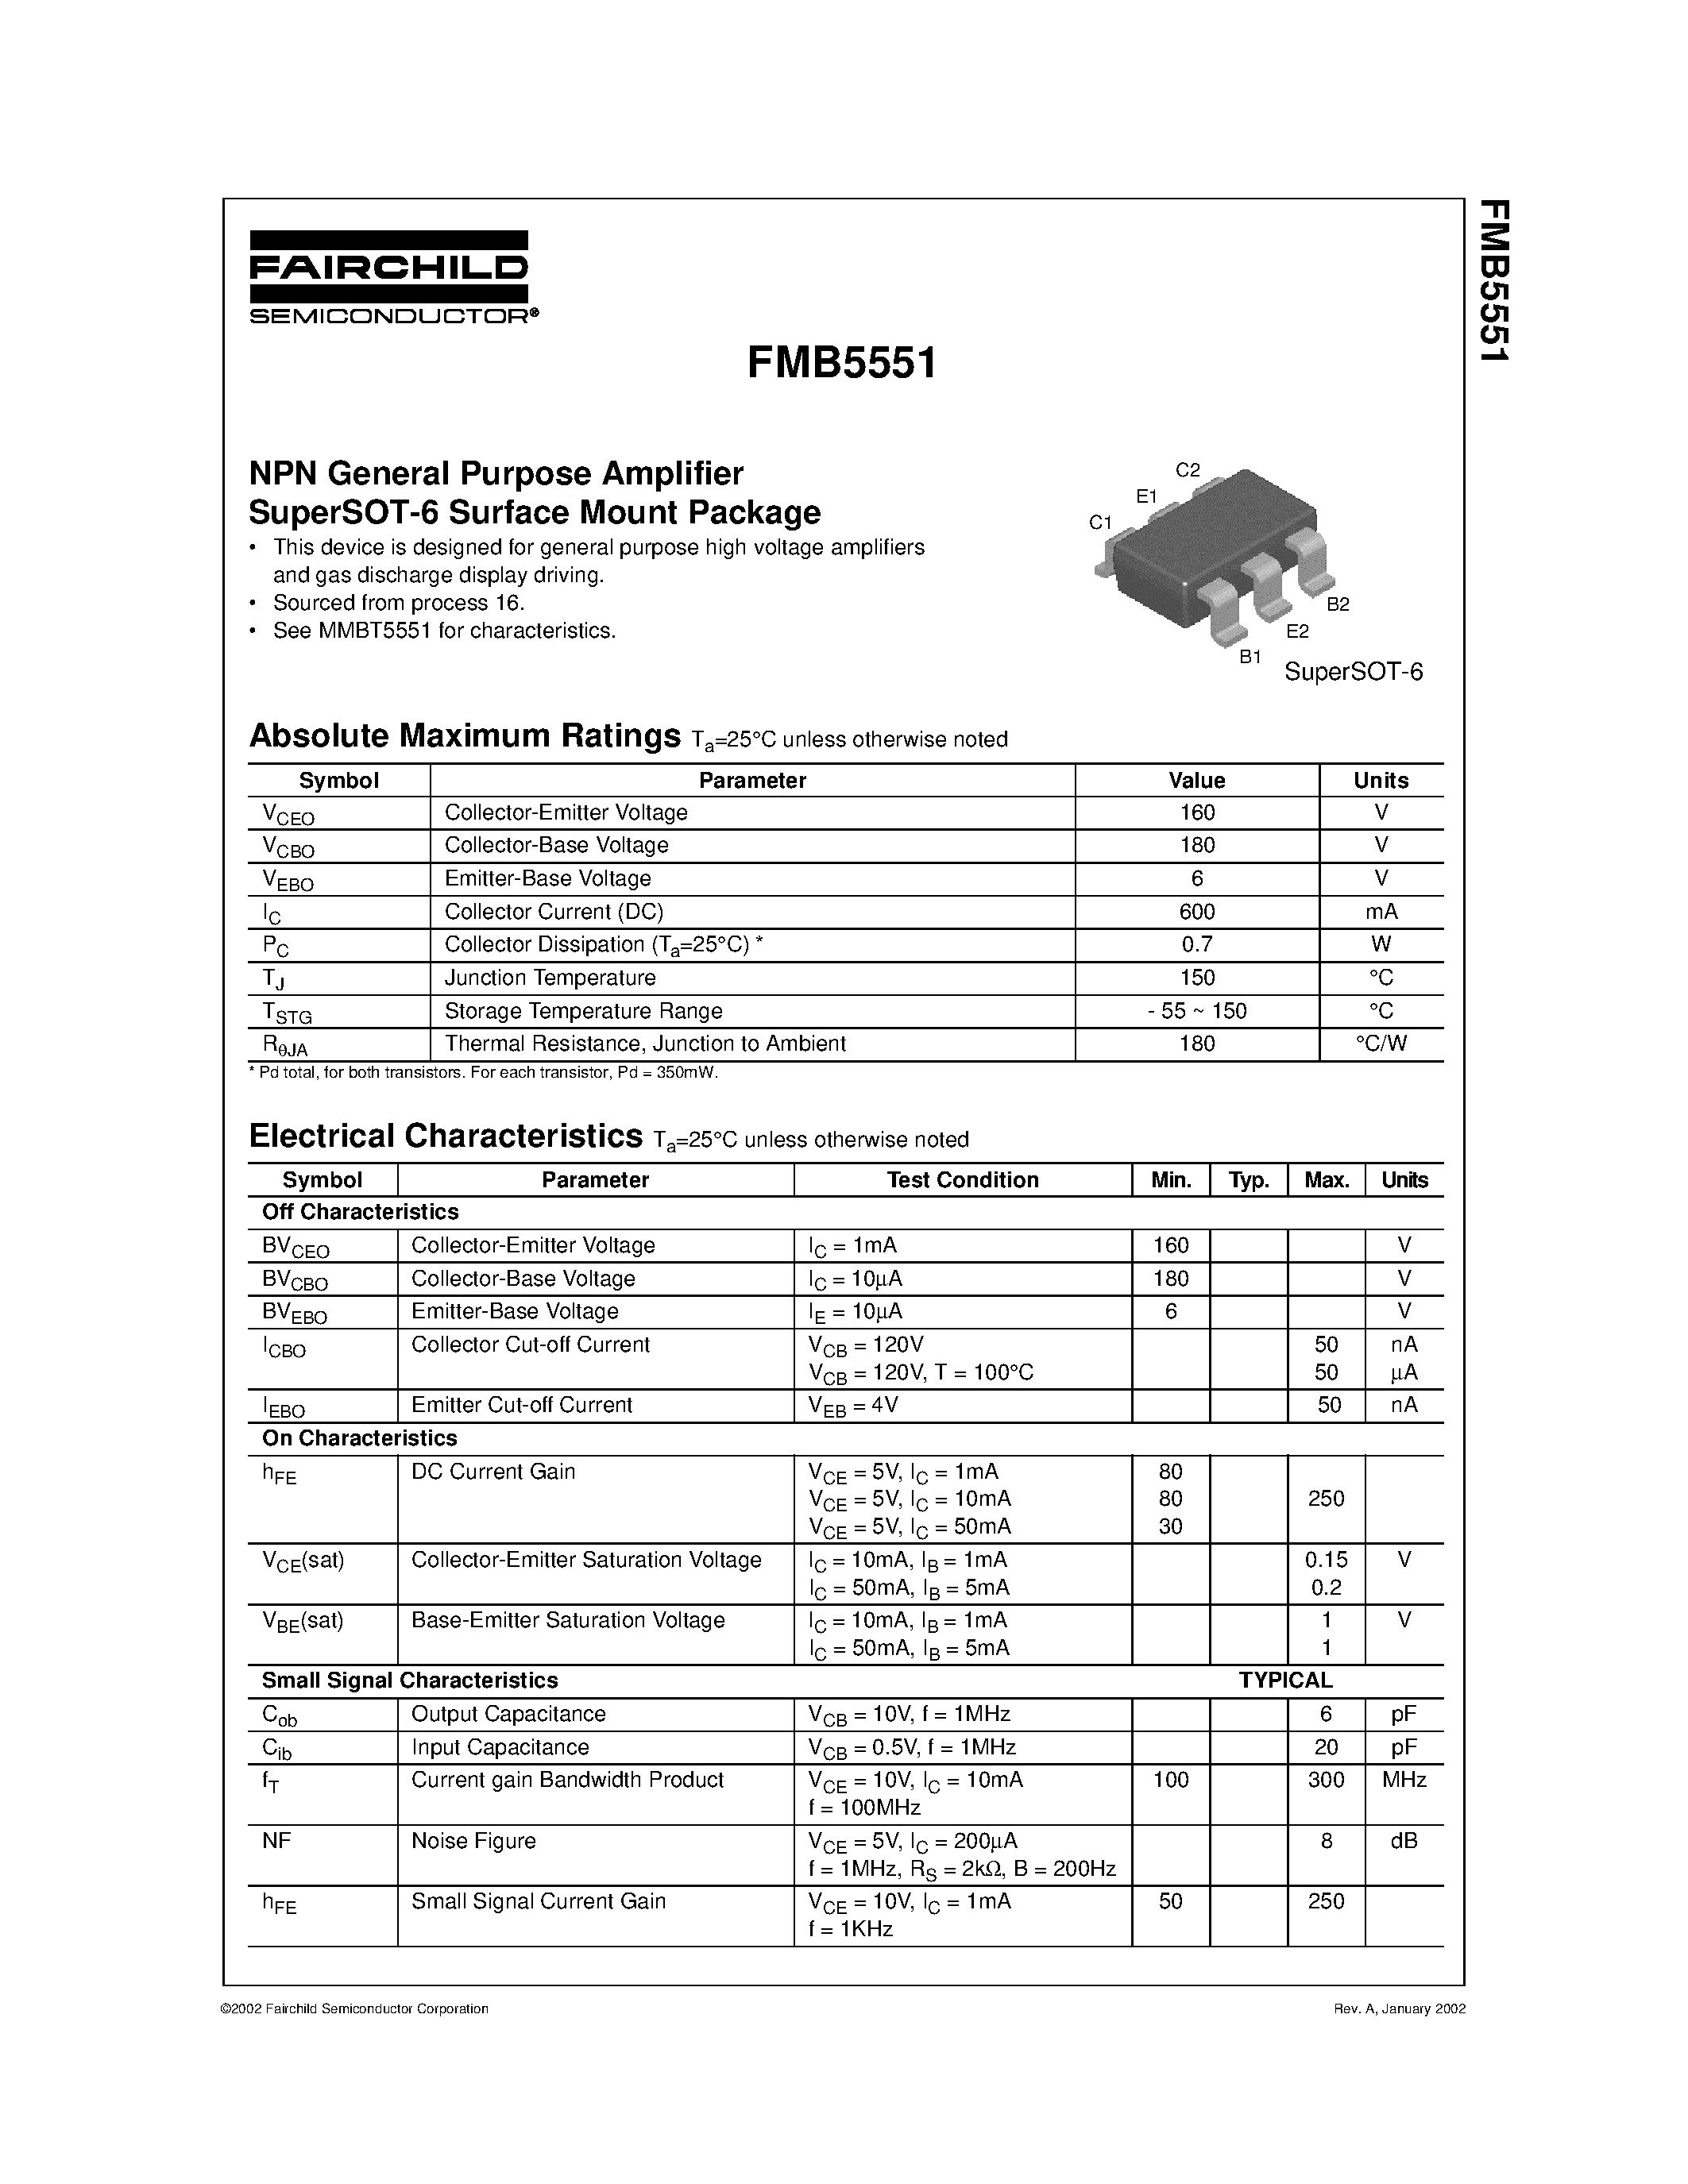 Datasheet FMB5551 - NPN General Purpose Amplifier SuperSOT-6 Surface Mount Package page 1